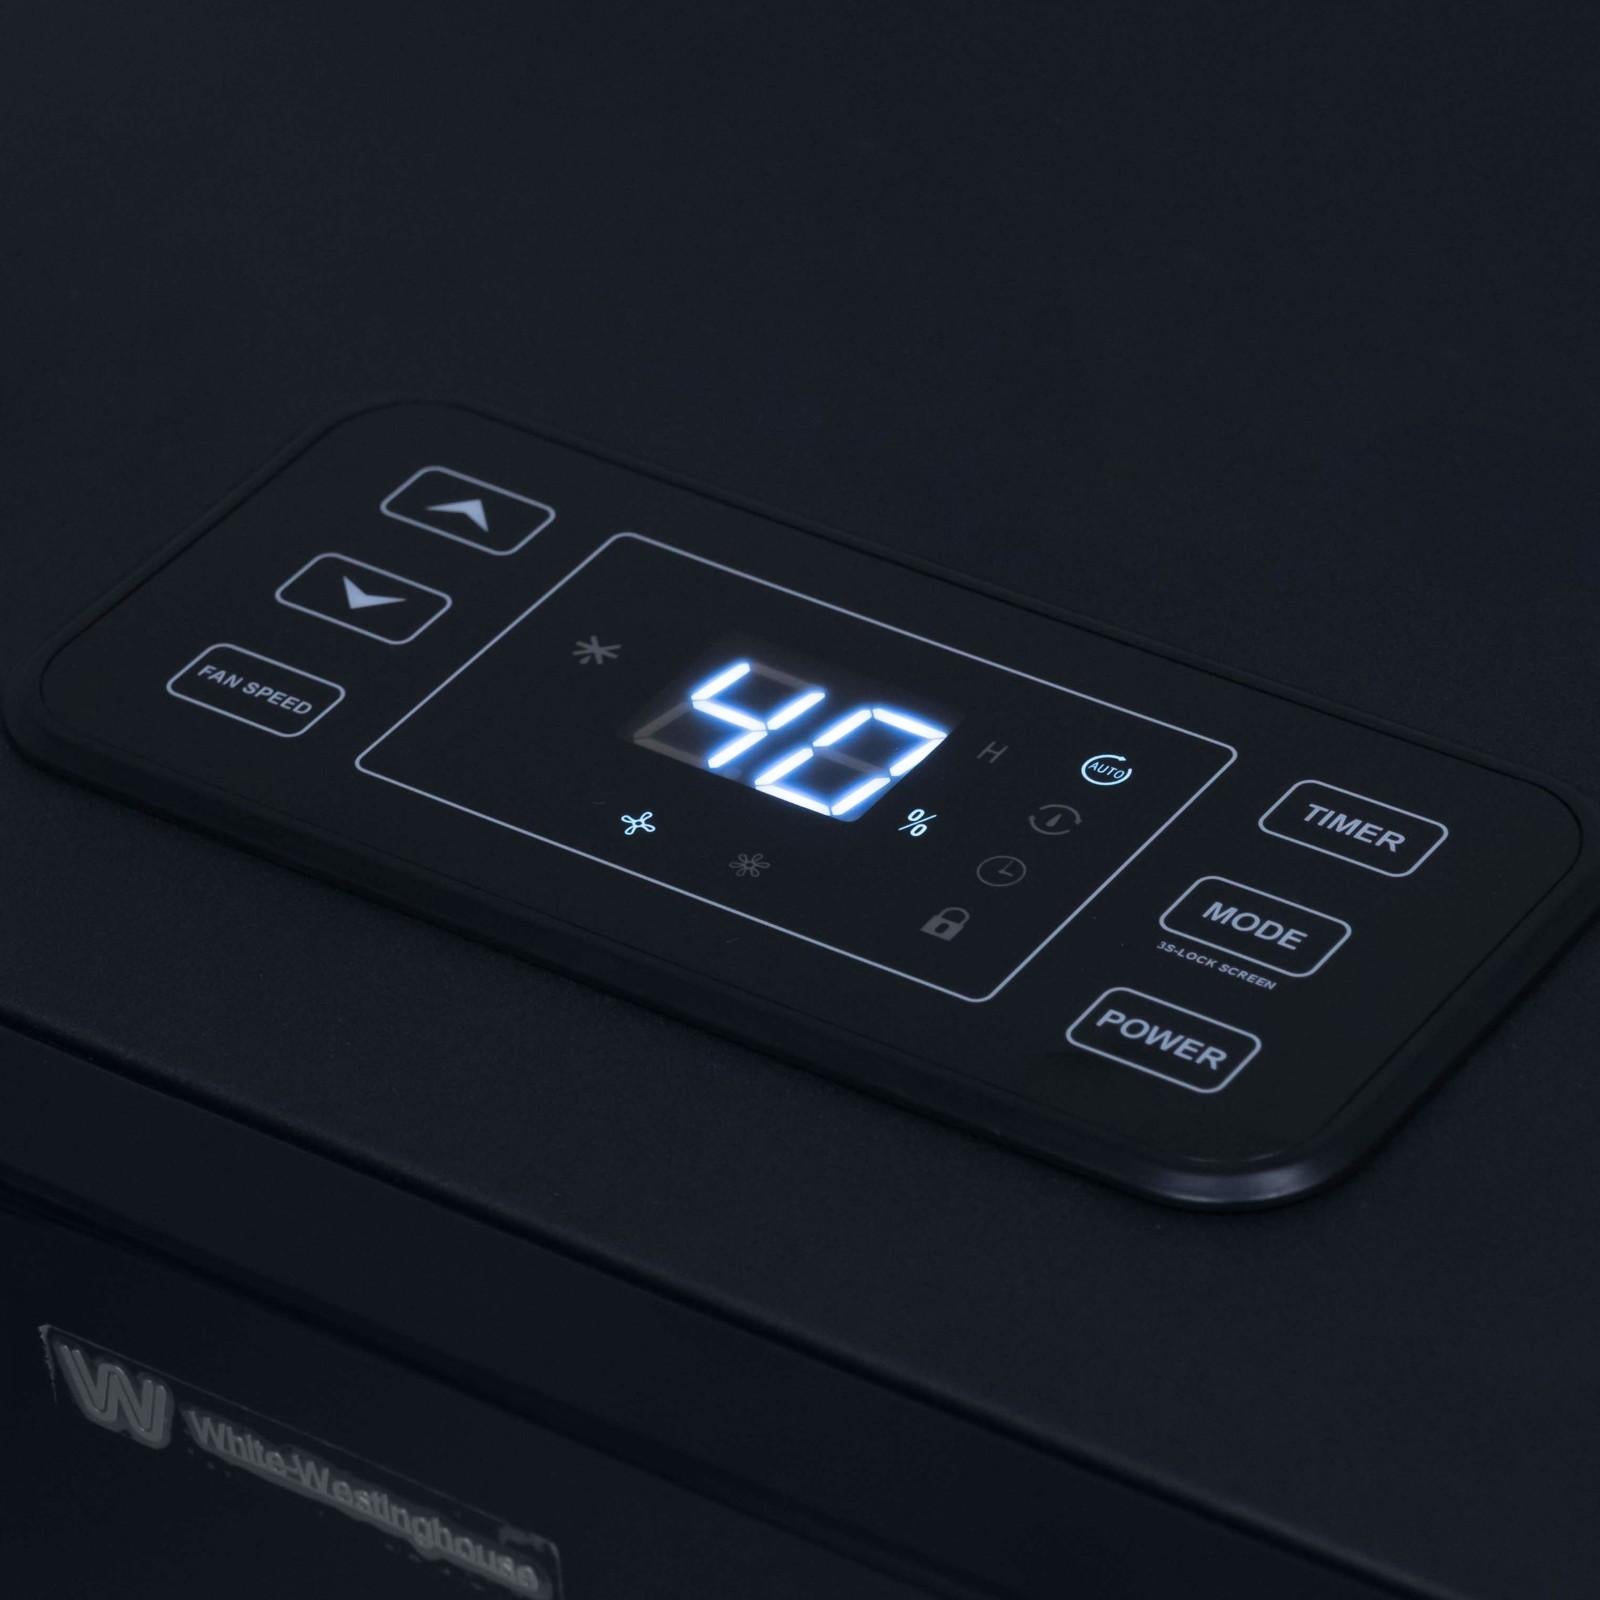 Close-up view of the illuminated digital control panel on the White Westinghouse Industrial Dehumidifier WDE100, showing a clear display and intuitive buttons for adjusting settings, mode, timer, and power. Ideal for precise humidity control in large commercial and industrial spaces.